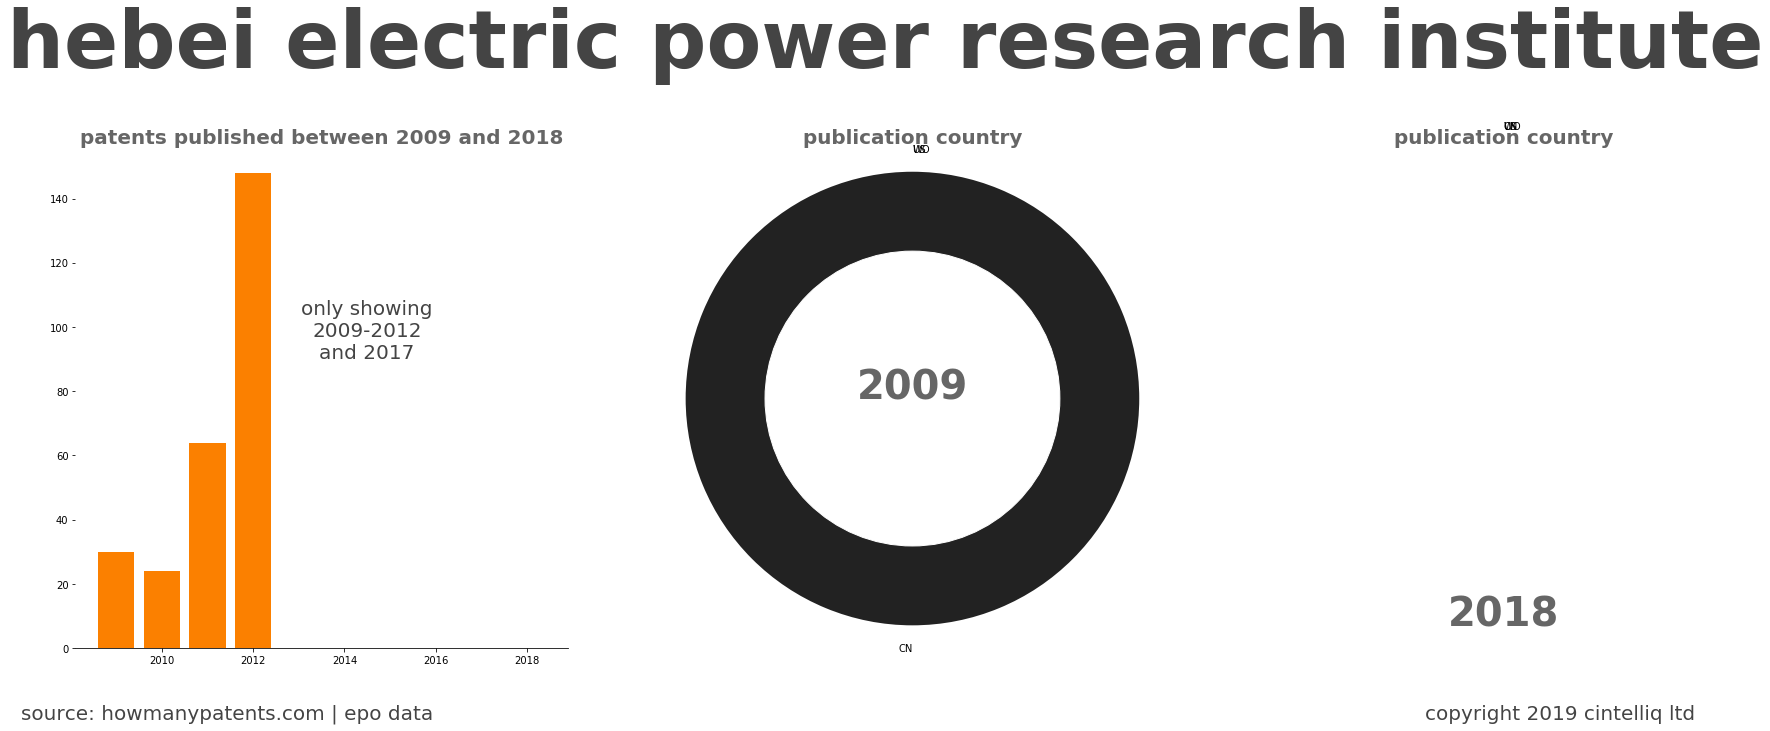 summary of patents for Hebei Electric Power Research Institute